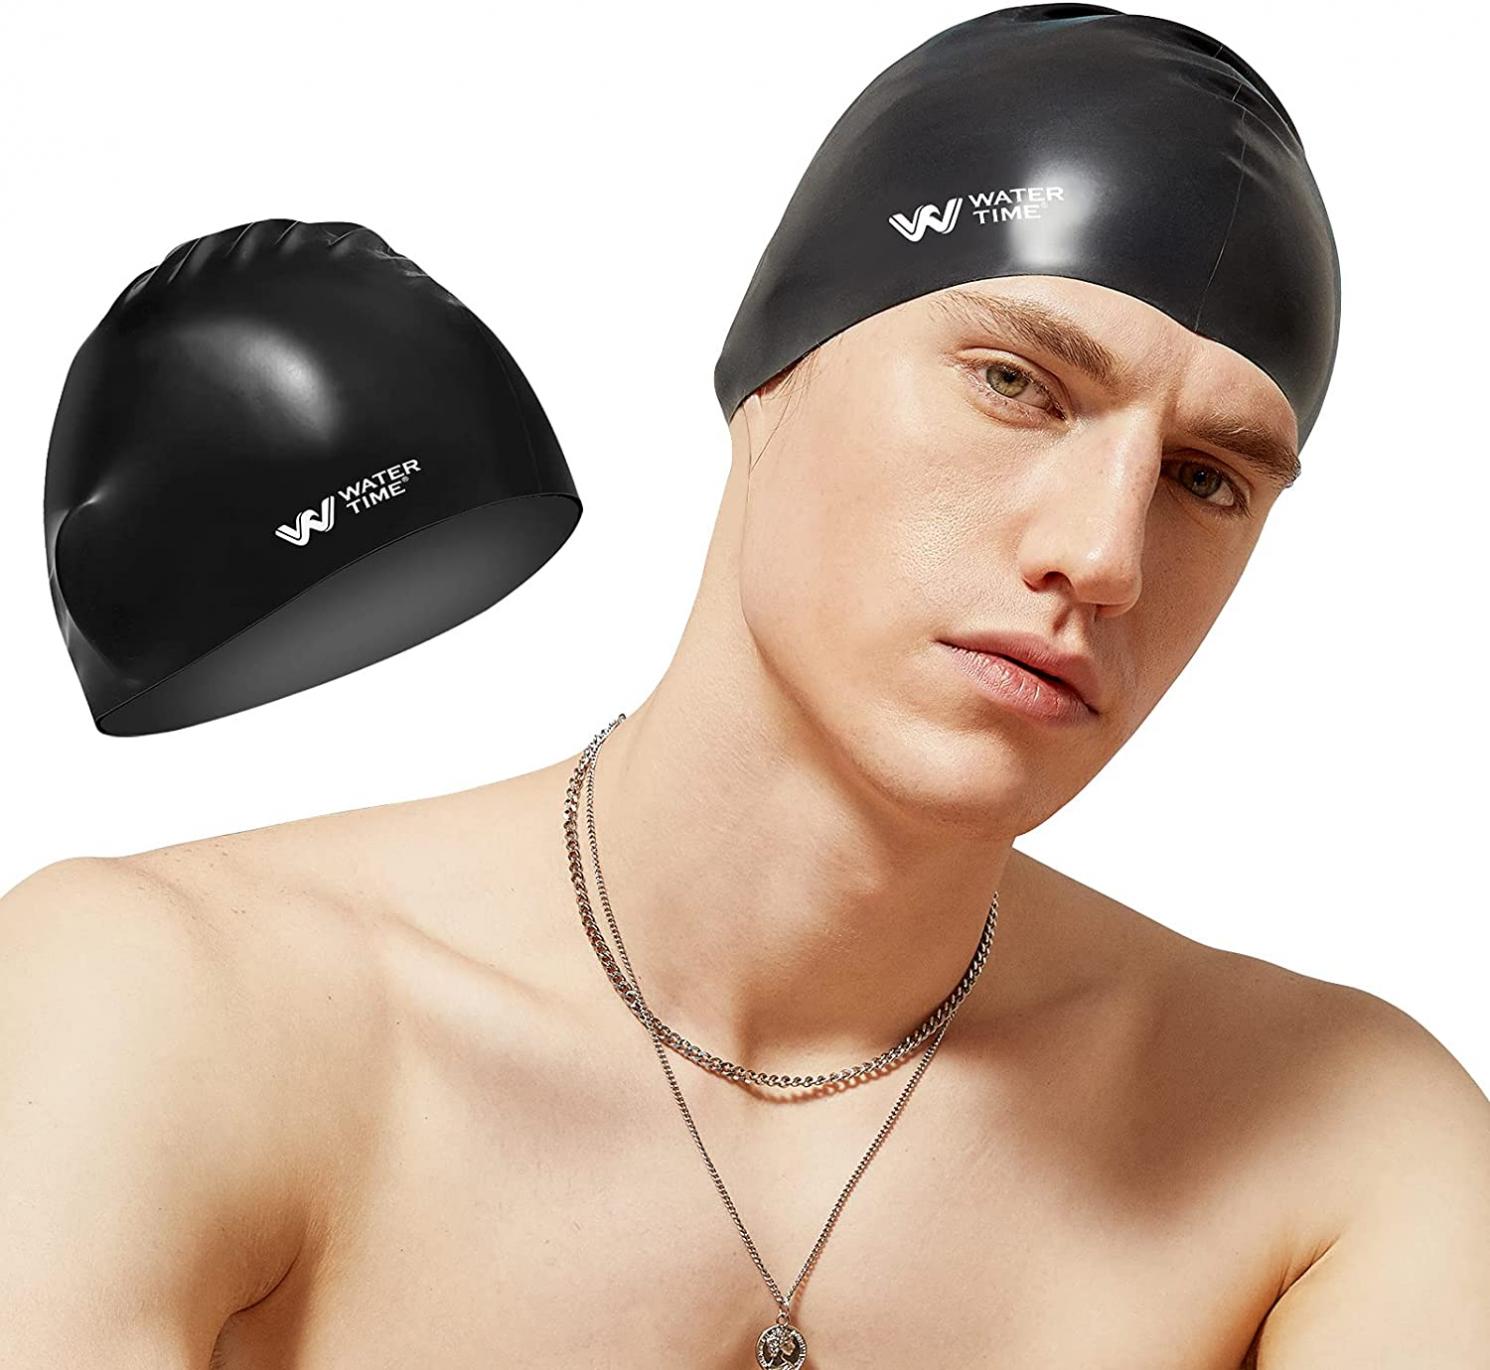 Swim Cap Swimming Goggles Set for Men Women,WATER TIME Silicone Swimming Caps for Long Hair,No Leaking Anti-Fog UV Protection